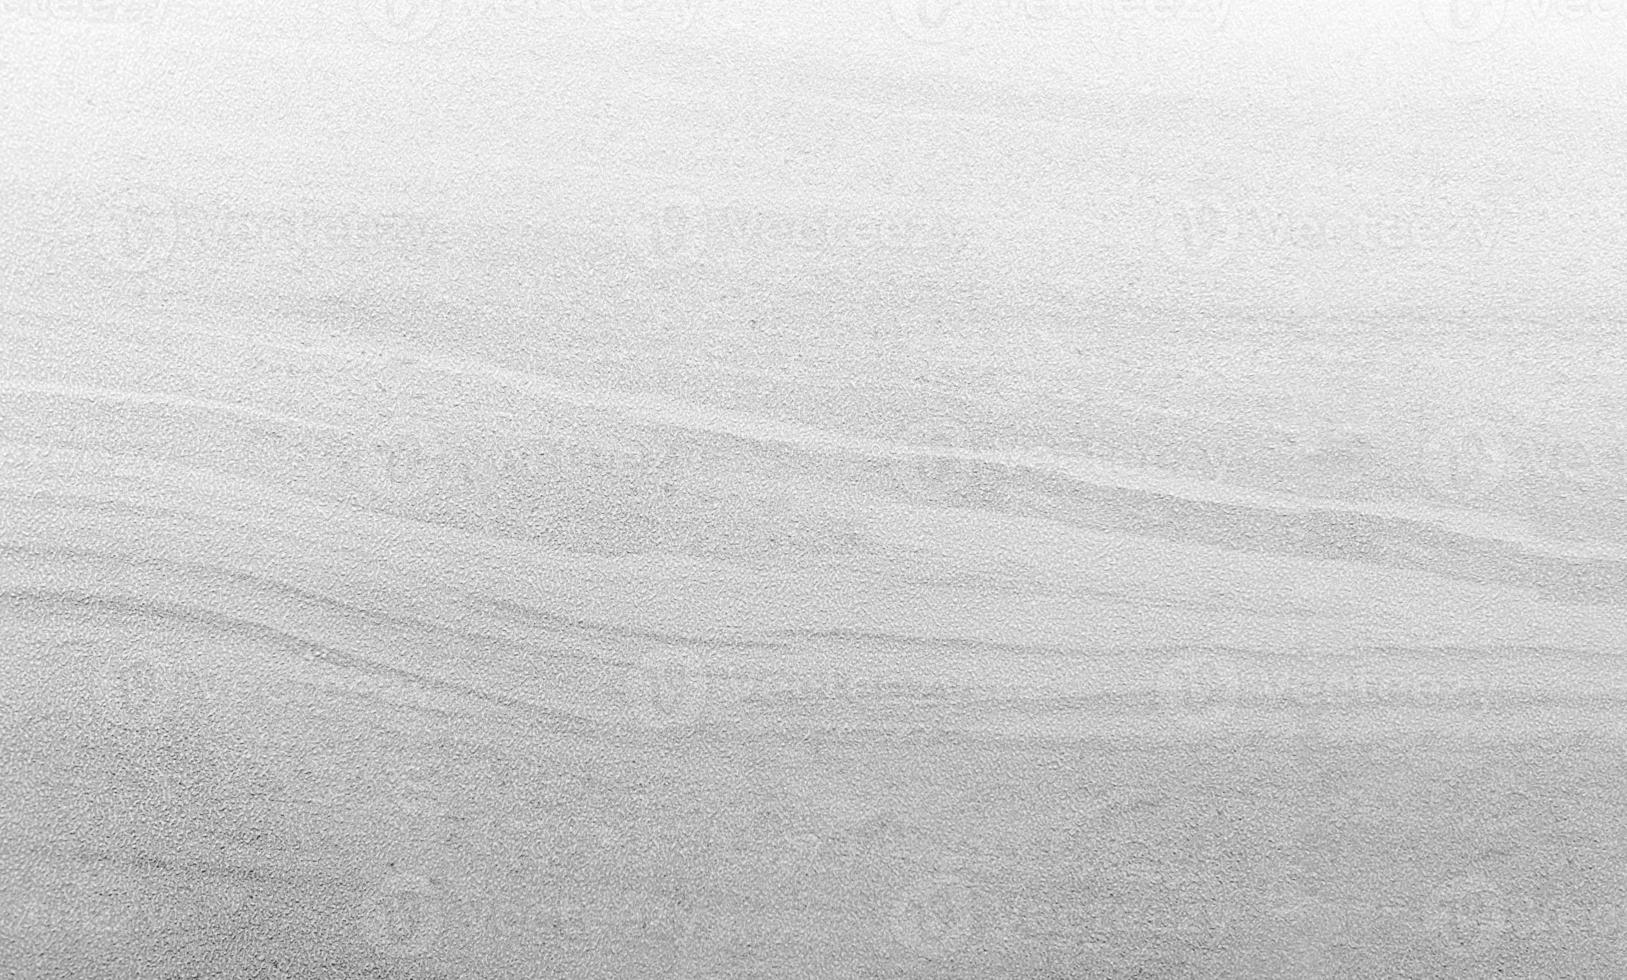 Surface of the white stone texture rough, gray-white tone. Use this for rock wallpaper or background image. There is a blank space for text. photo